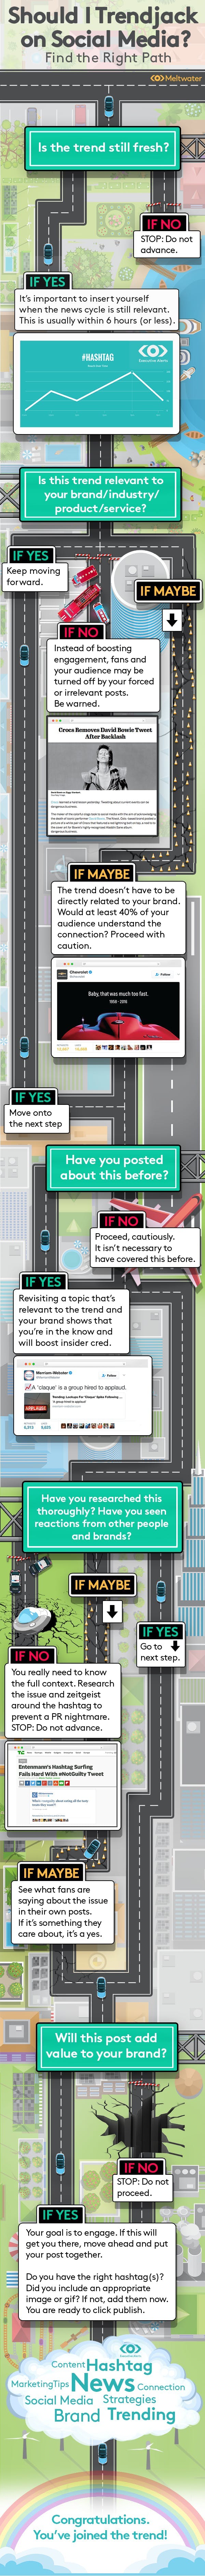 Infographic on trendjacking. Ask yourself is the trend still fresh then insert yourself while the cycle is relevant. 